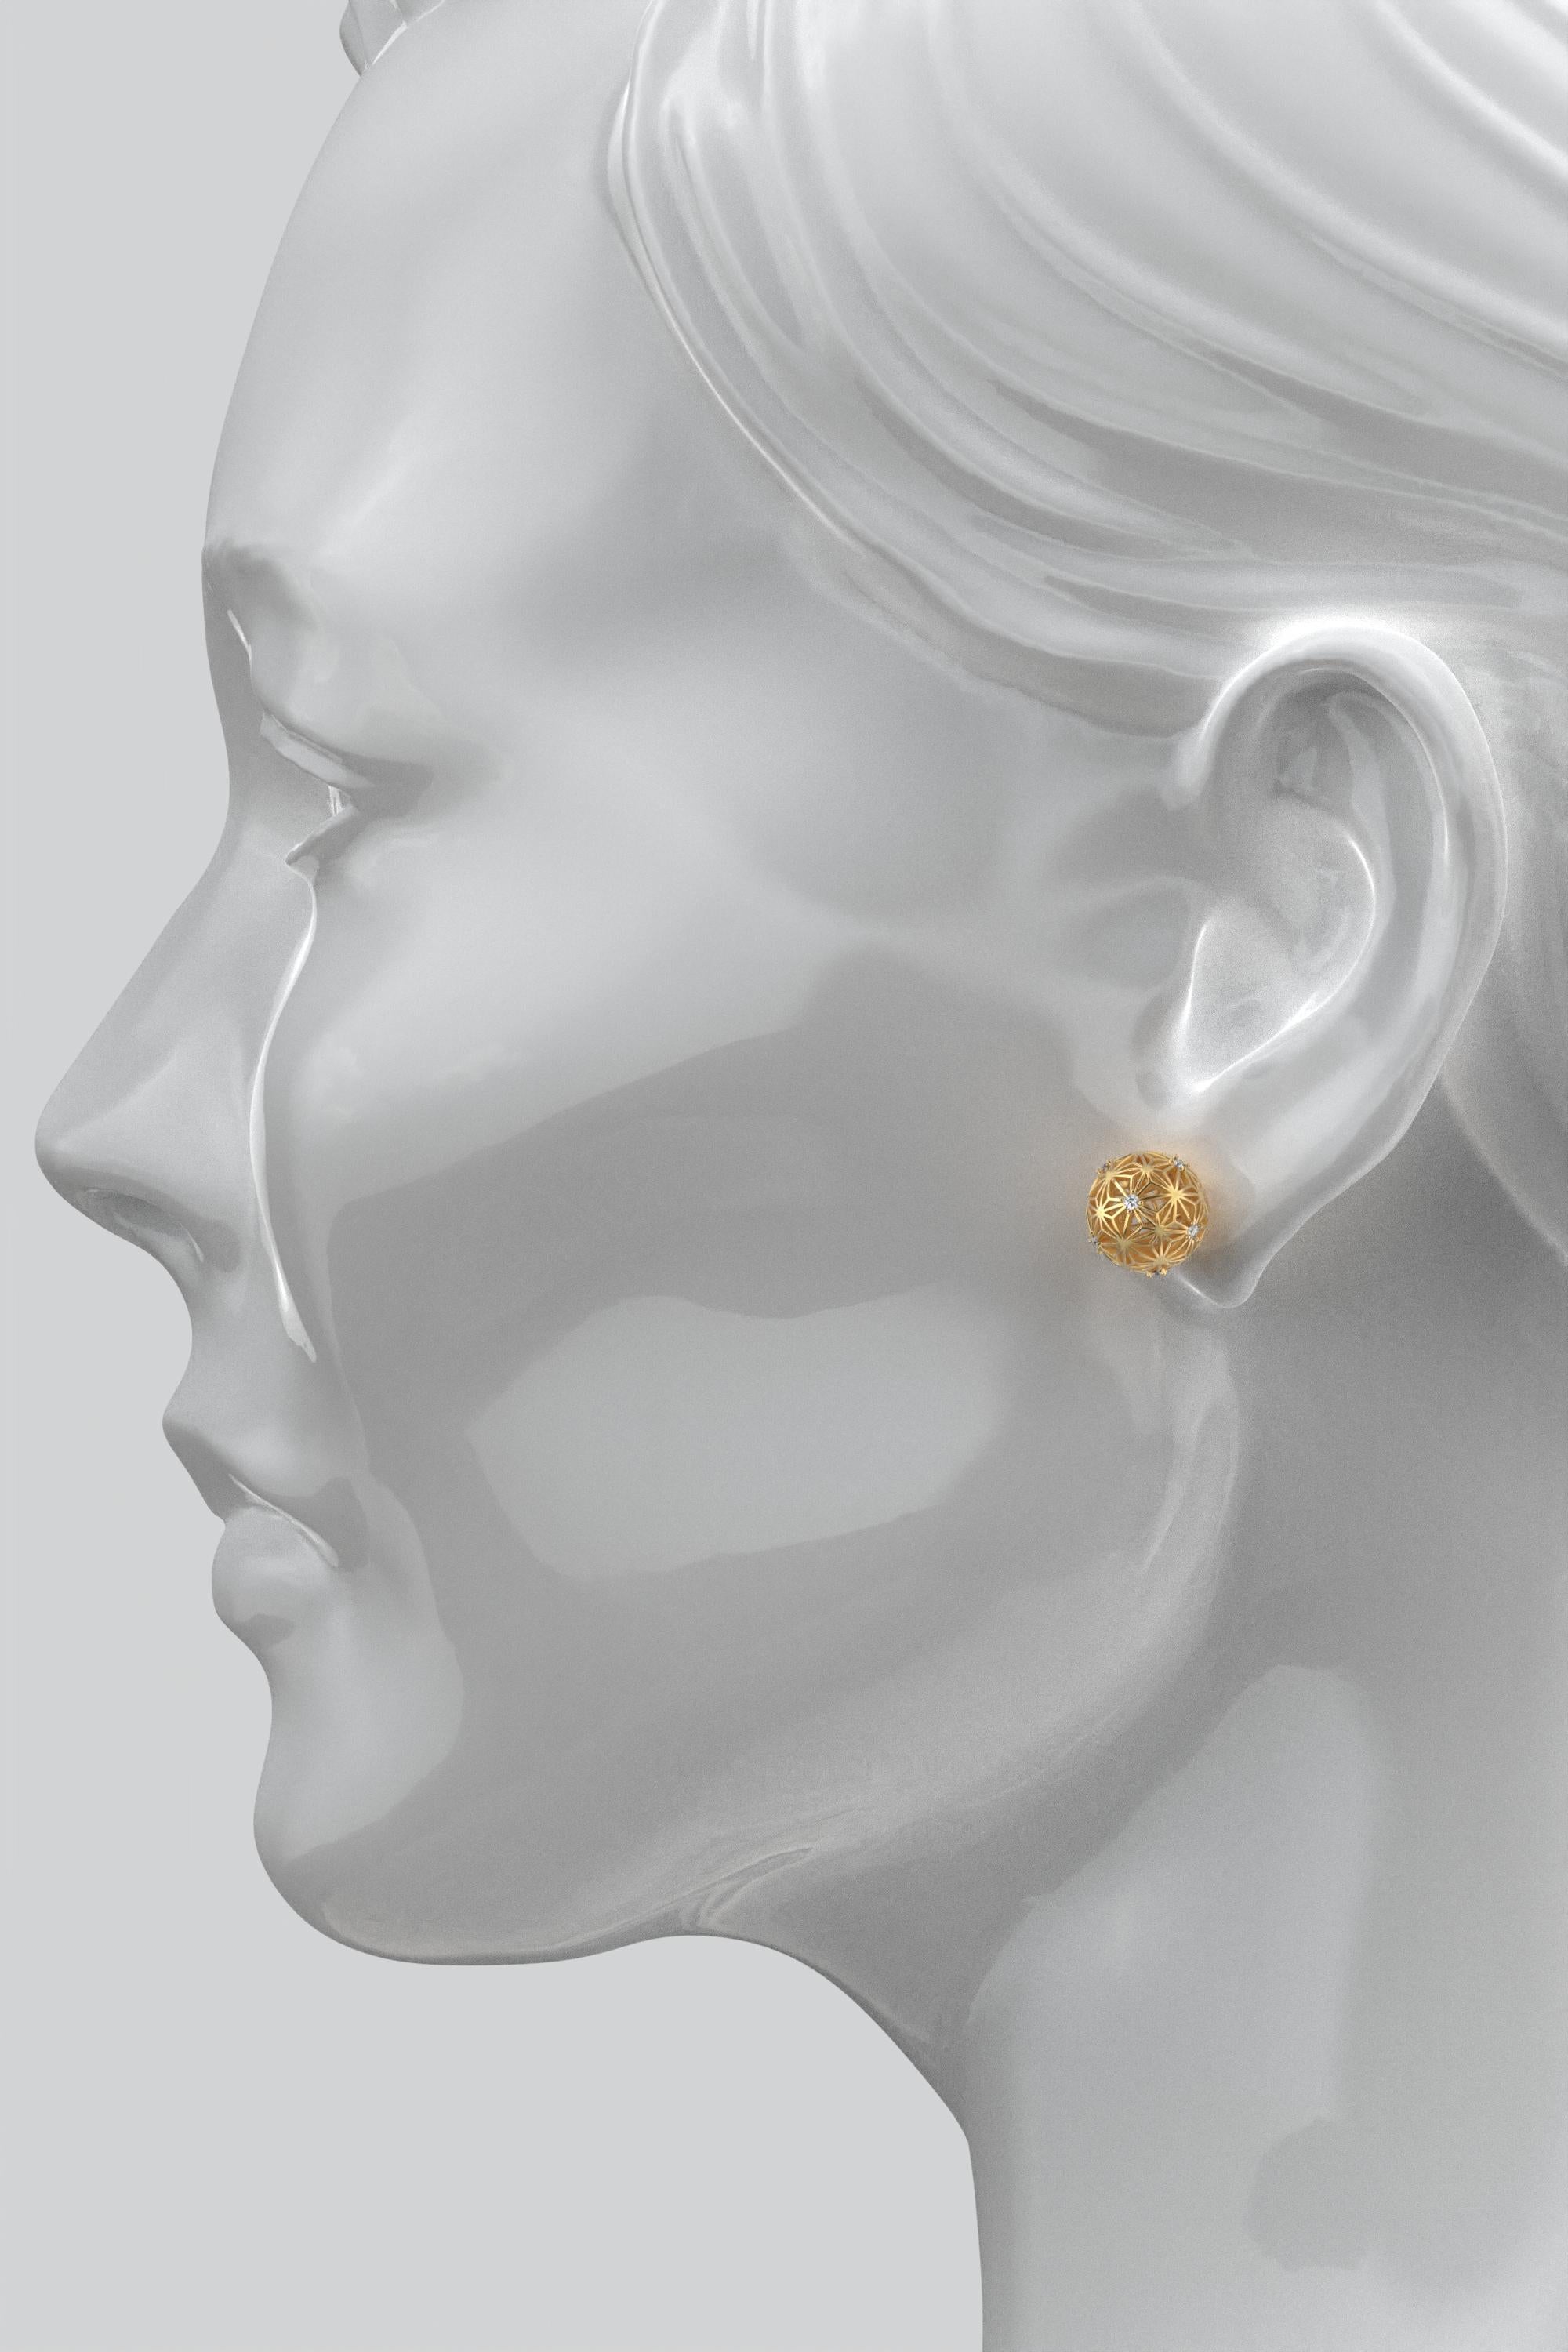 Brilliant Cut Oltremare Gioielli Diamond Stud Earrings in 18k Gold Made in Italy  For Sale